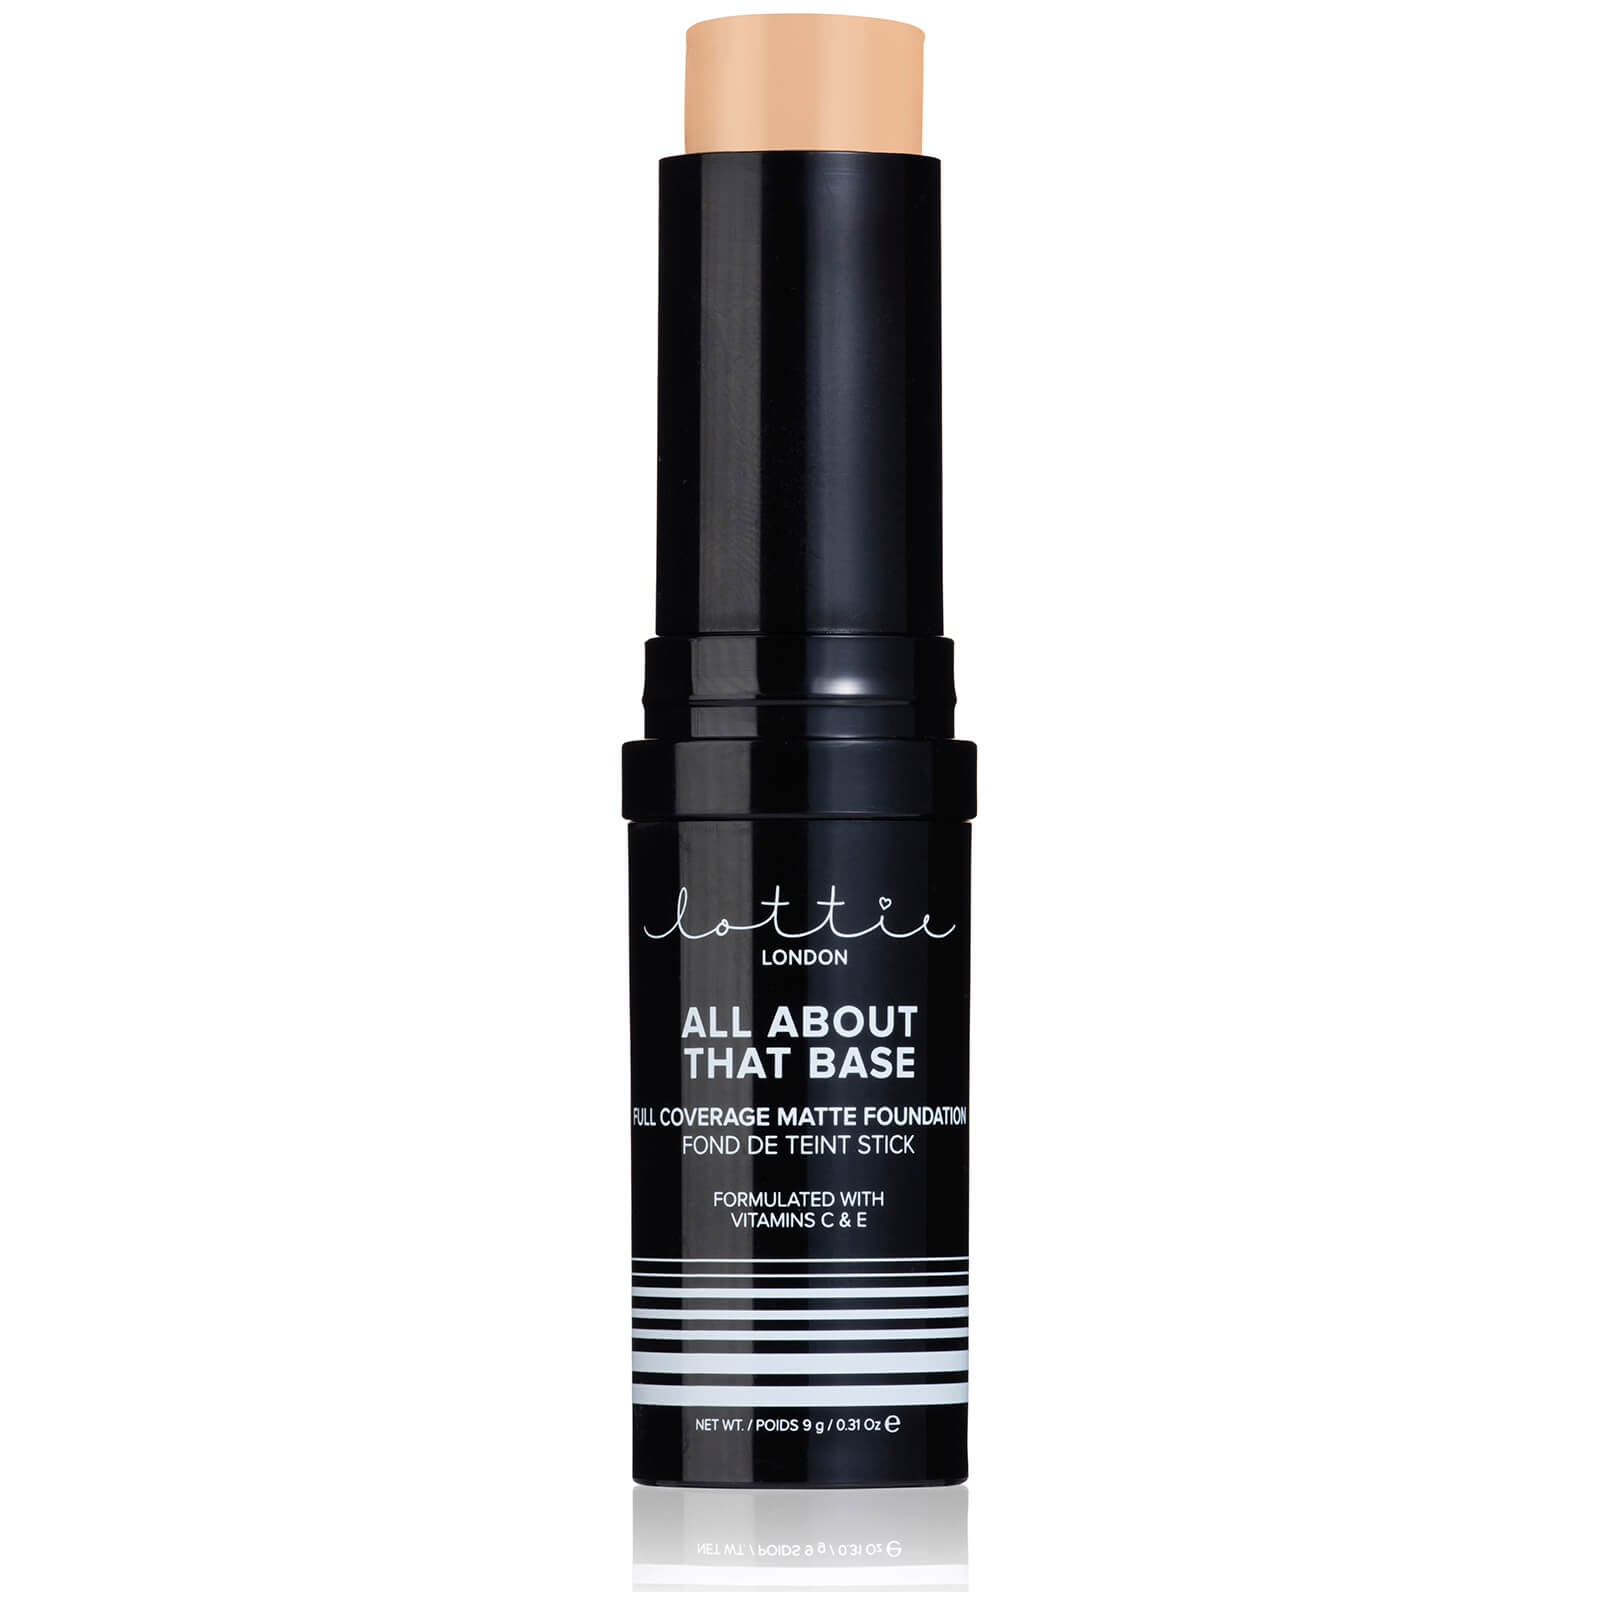 Lottie London Full Coverage Matte Foundation Stick 9g (Various Shades) - 6 Toasted Almond